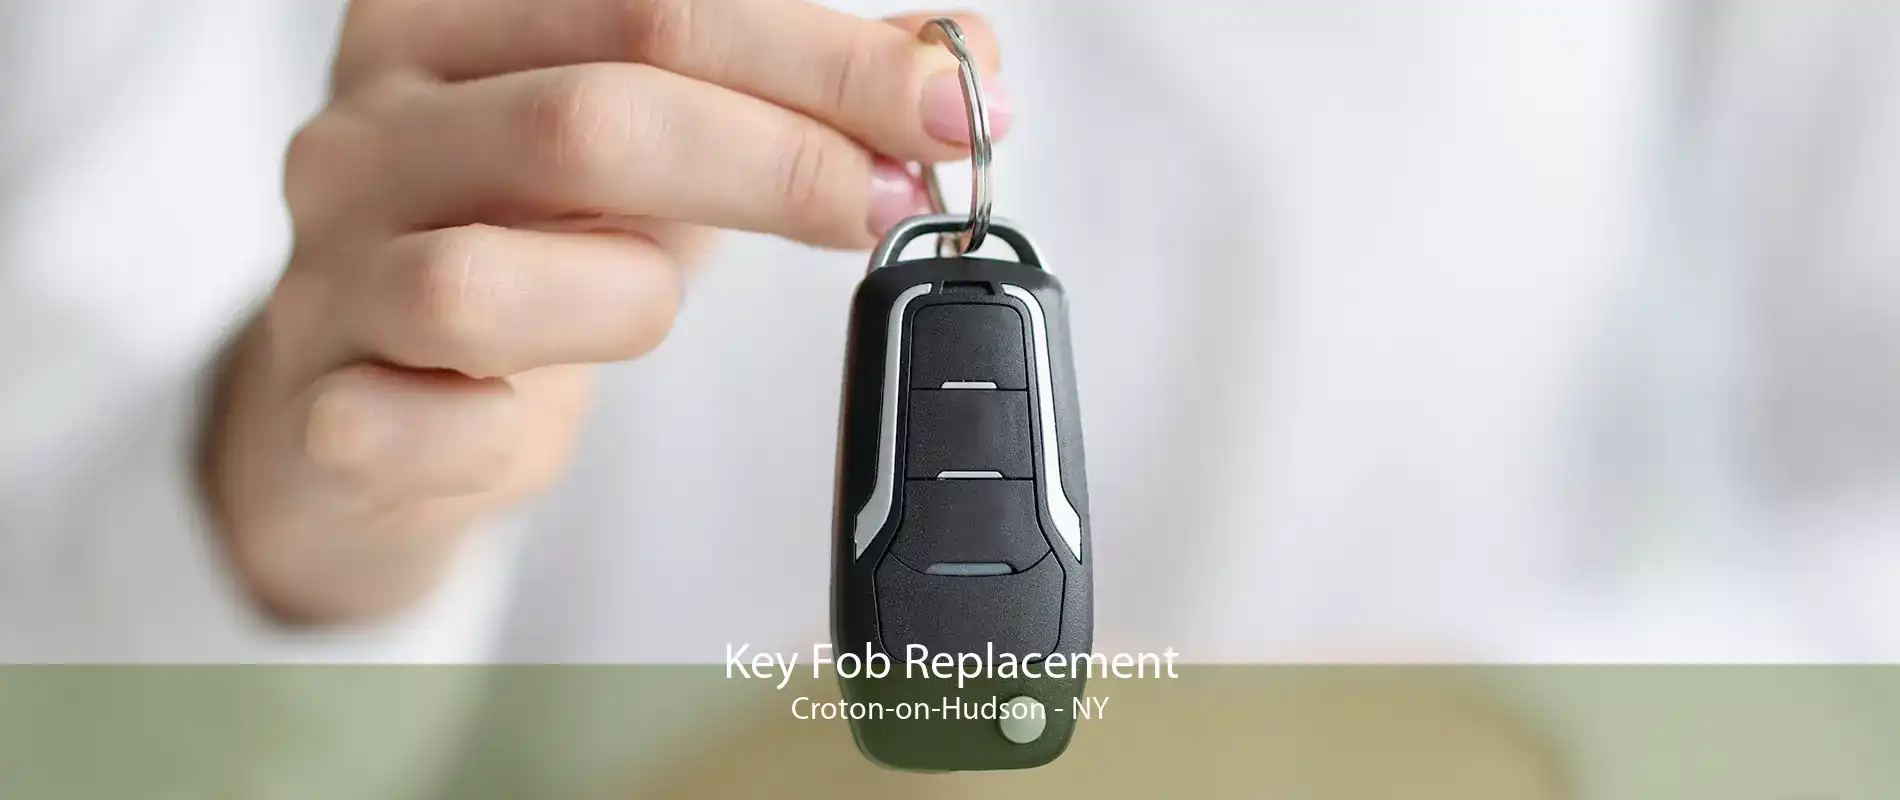 Key Fob Replacement Croton-on-Hudson - NY